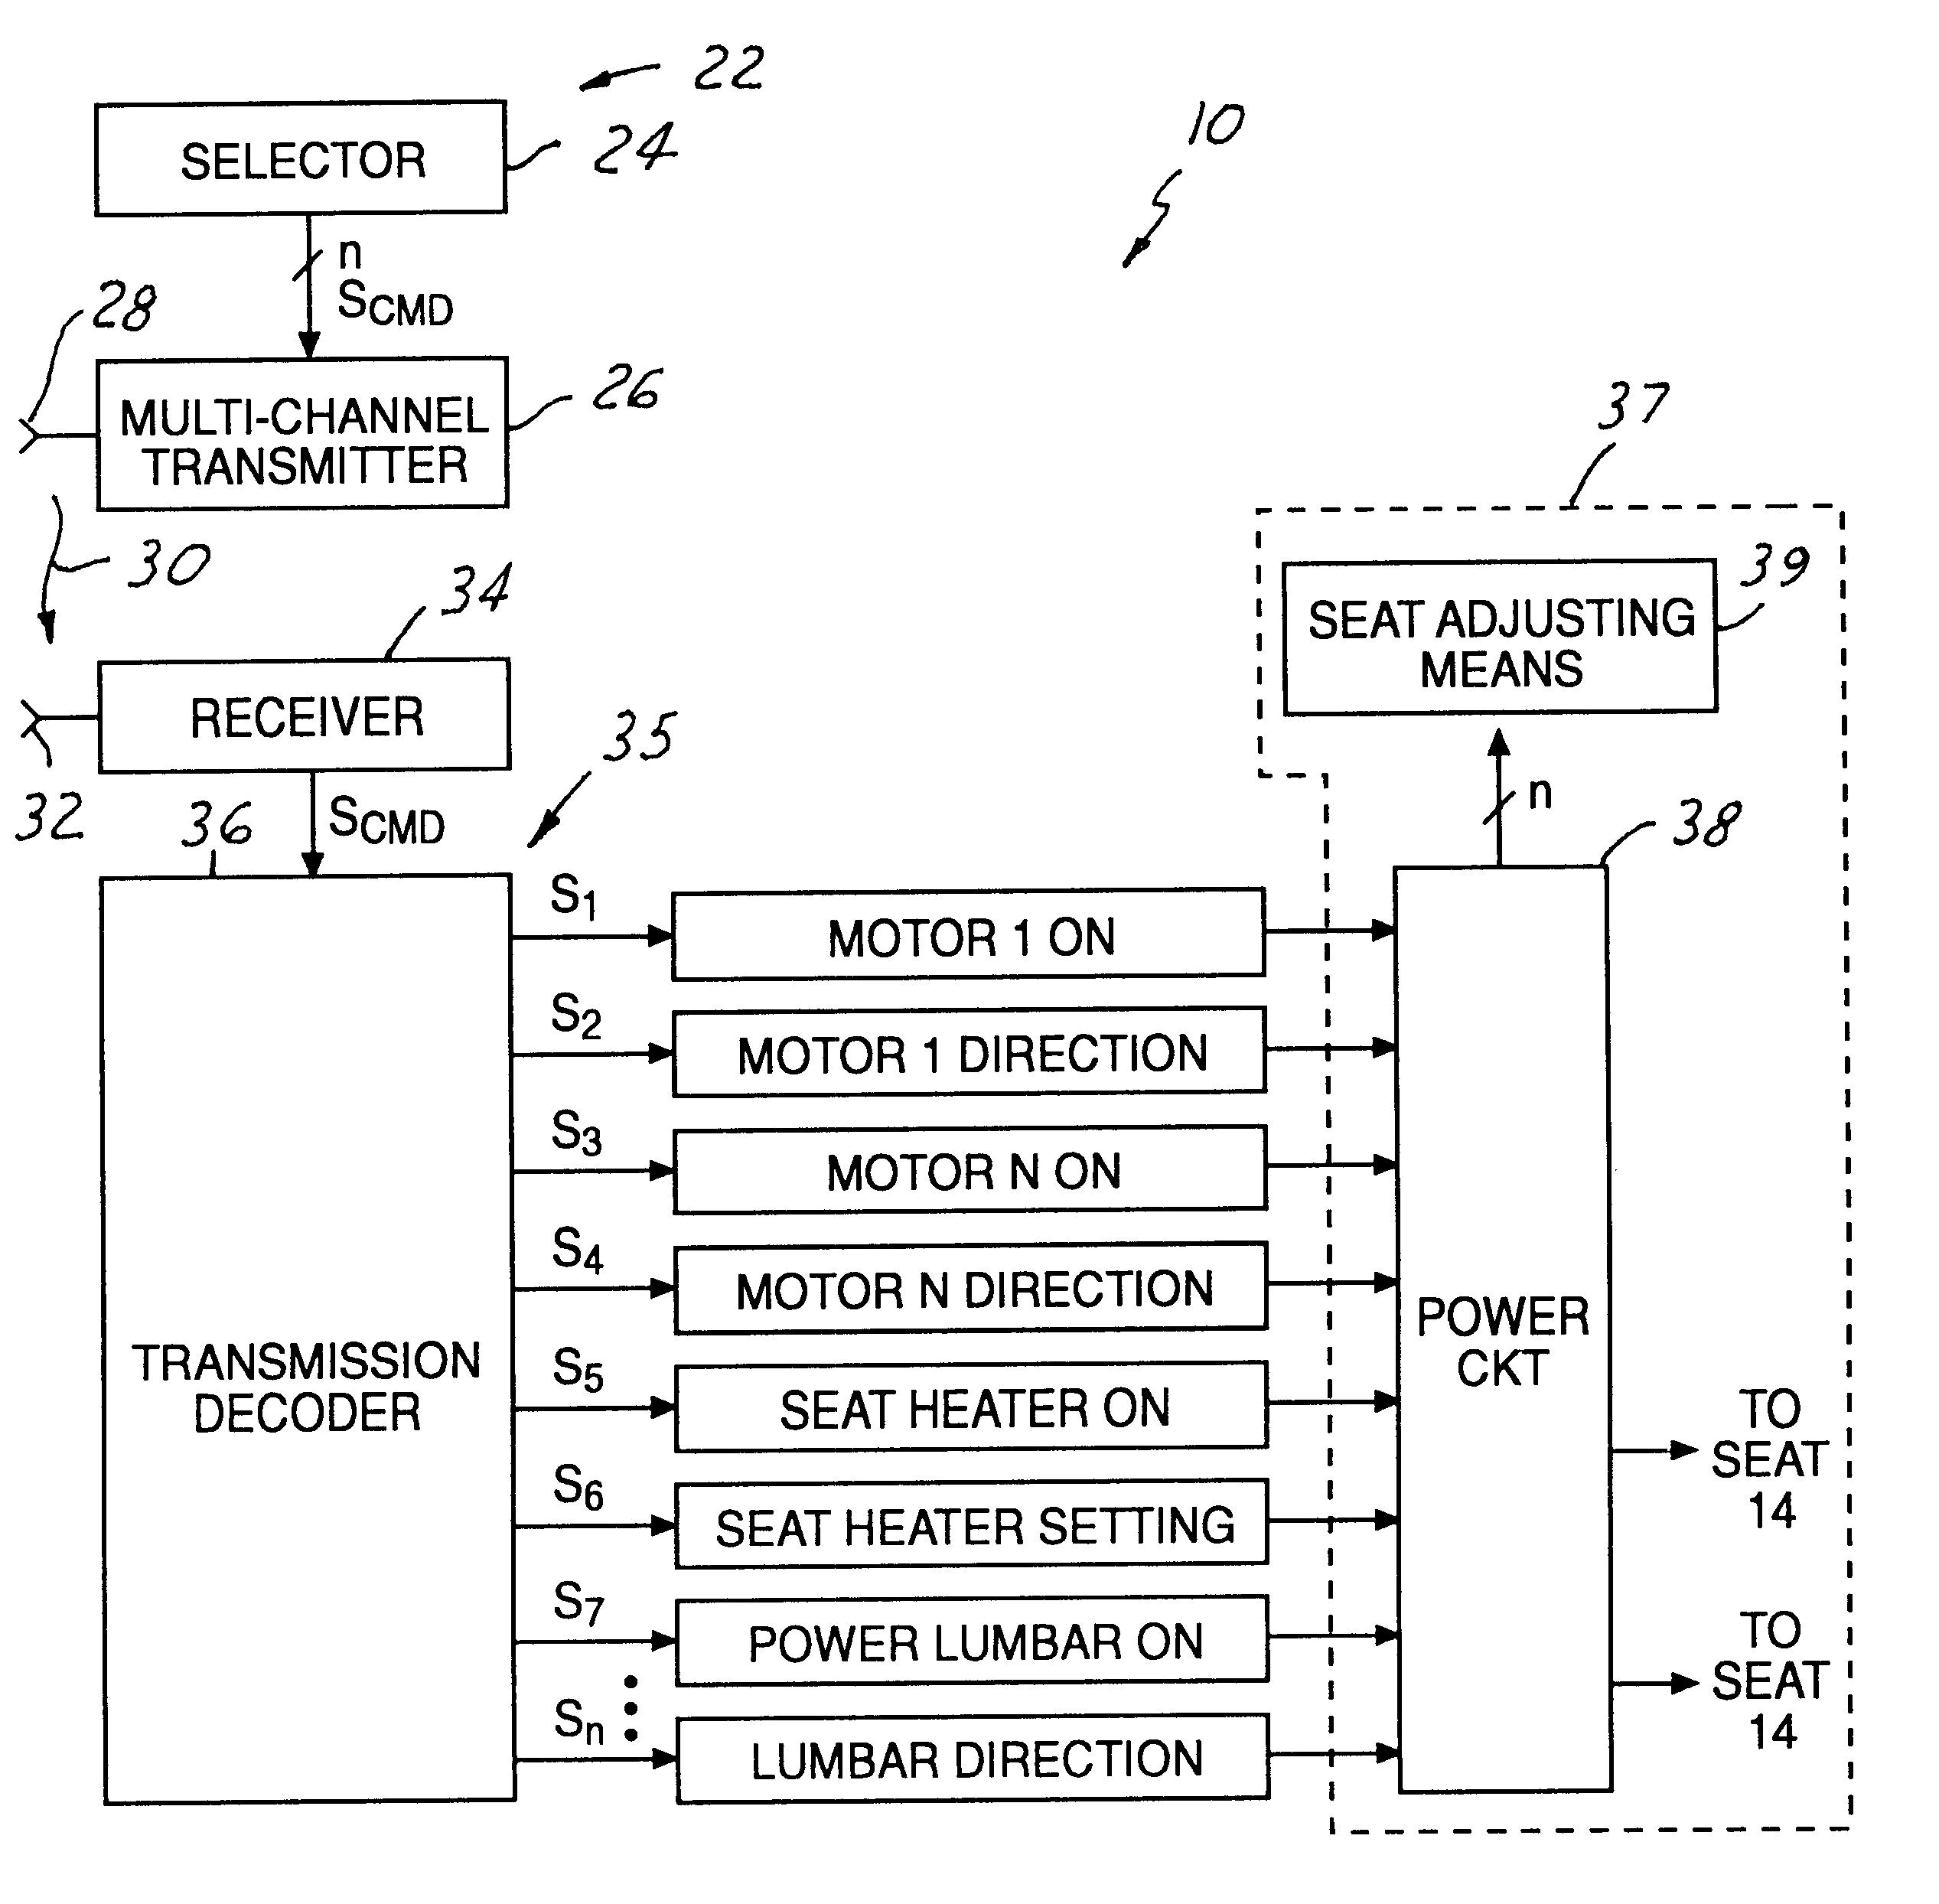 Remote power seat control system and method